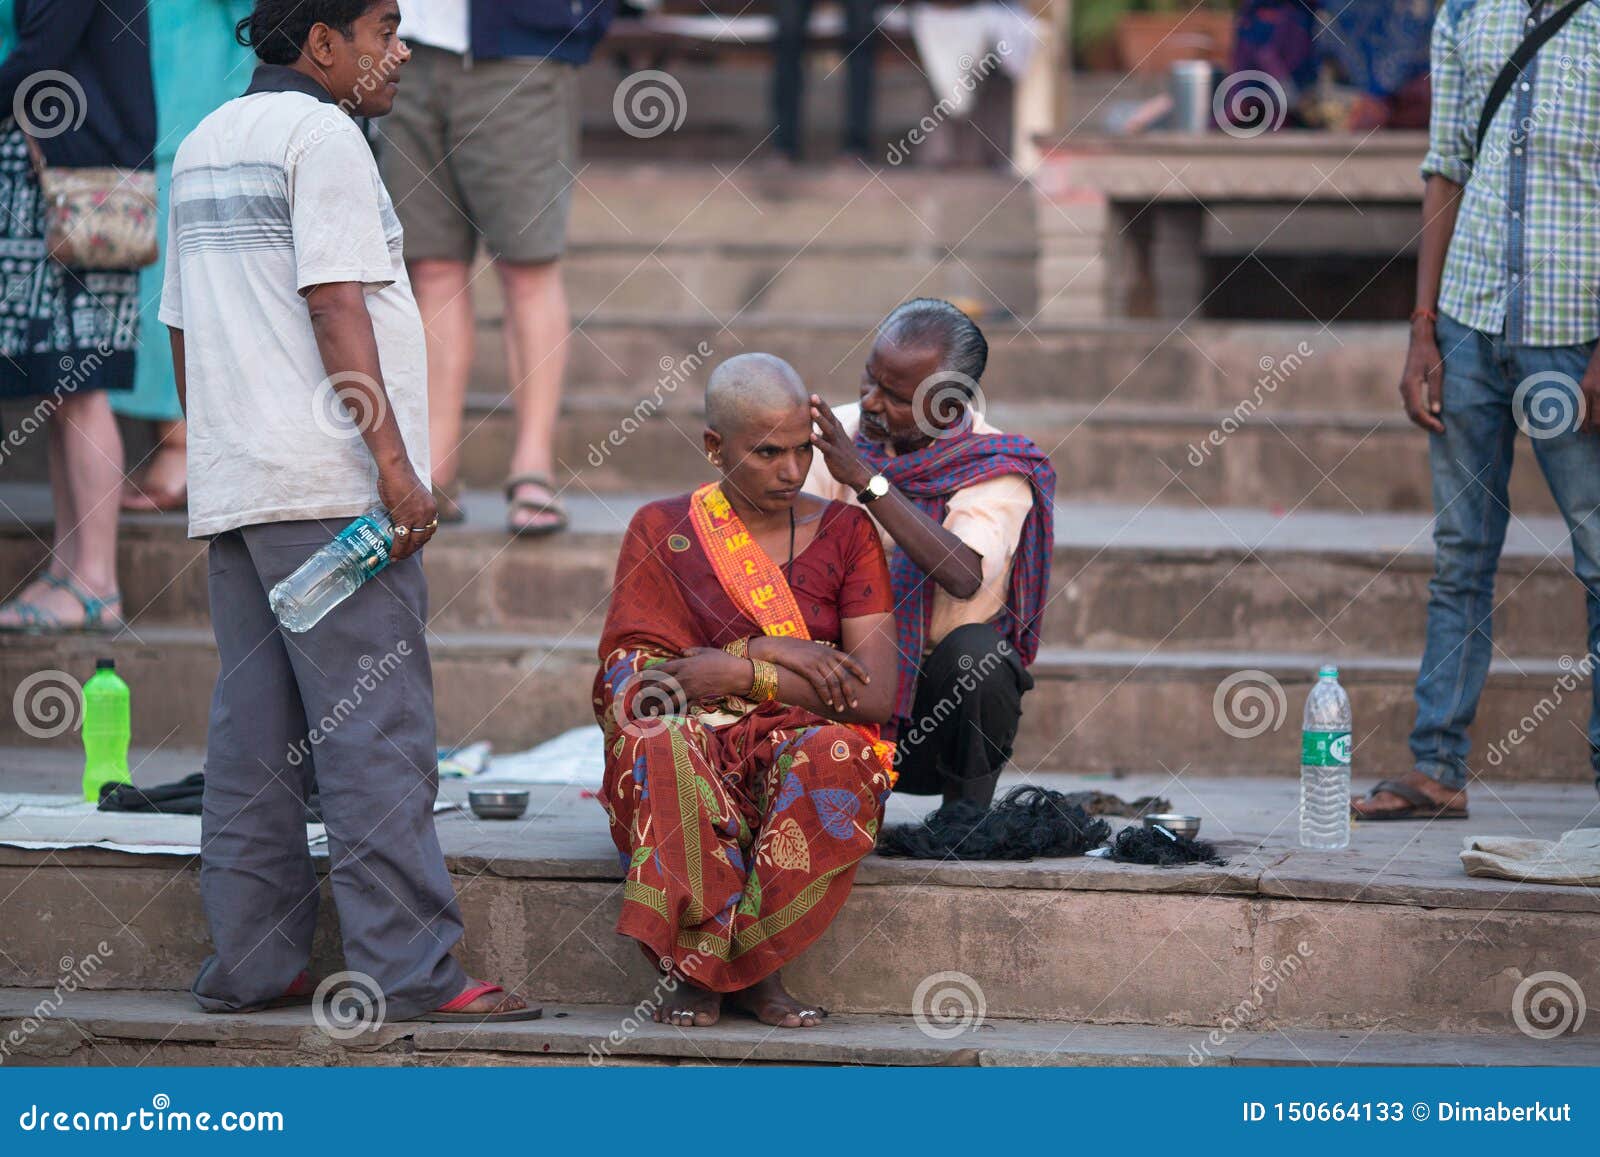 Hairdresser Cuts Hair of the Pilgrim. Editorial Stock Photo - Image of  benares, culture: 150664133